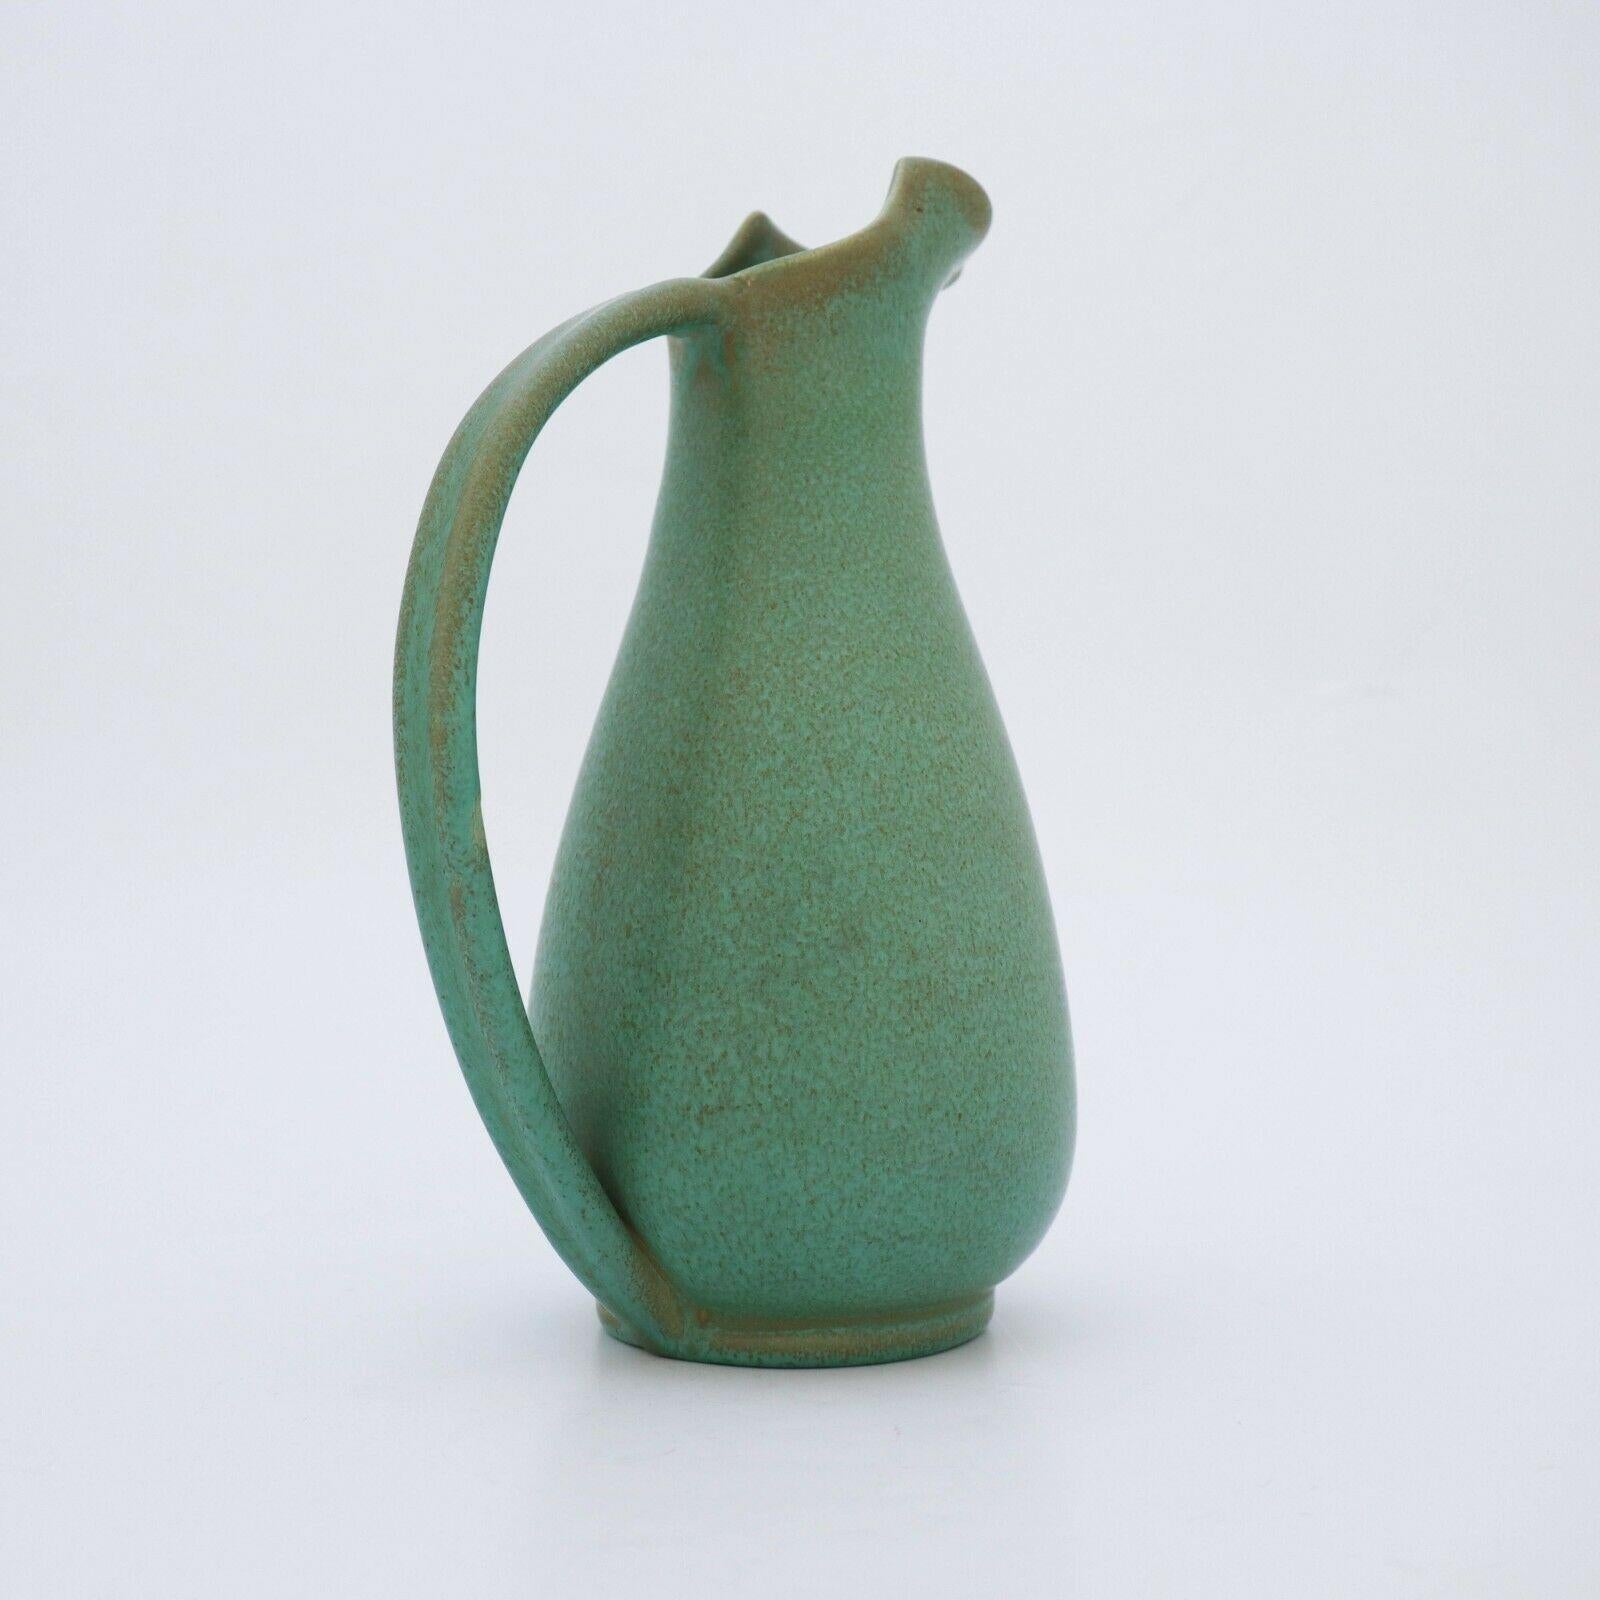 A lovely pitcher designed by Ewald Dahlskog in the 1930s at Bo Fajans in Gefle, Sweden. It is 26.5 cm high and in perfect condition.